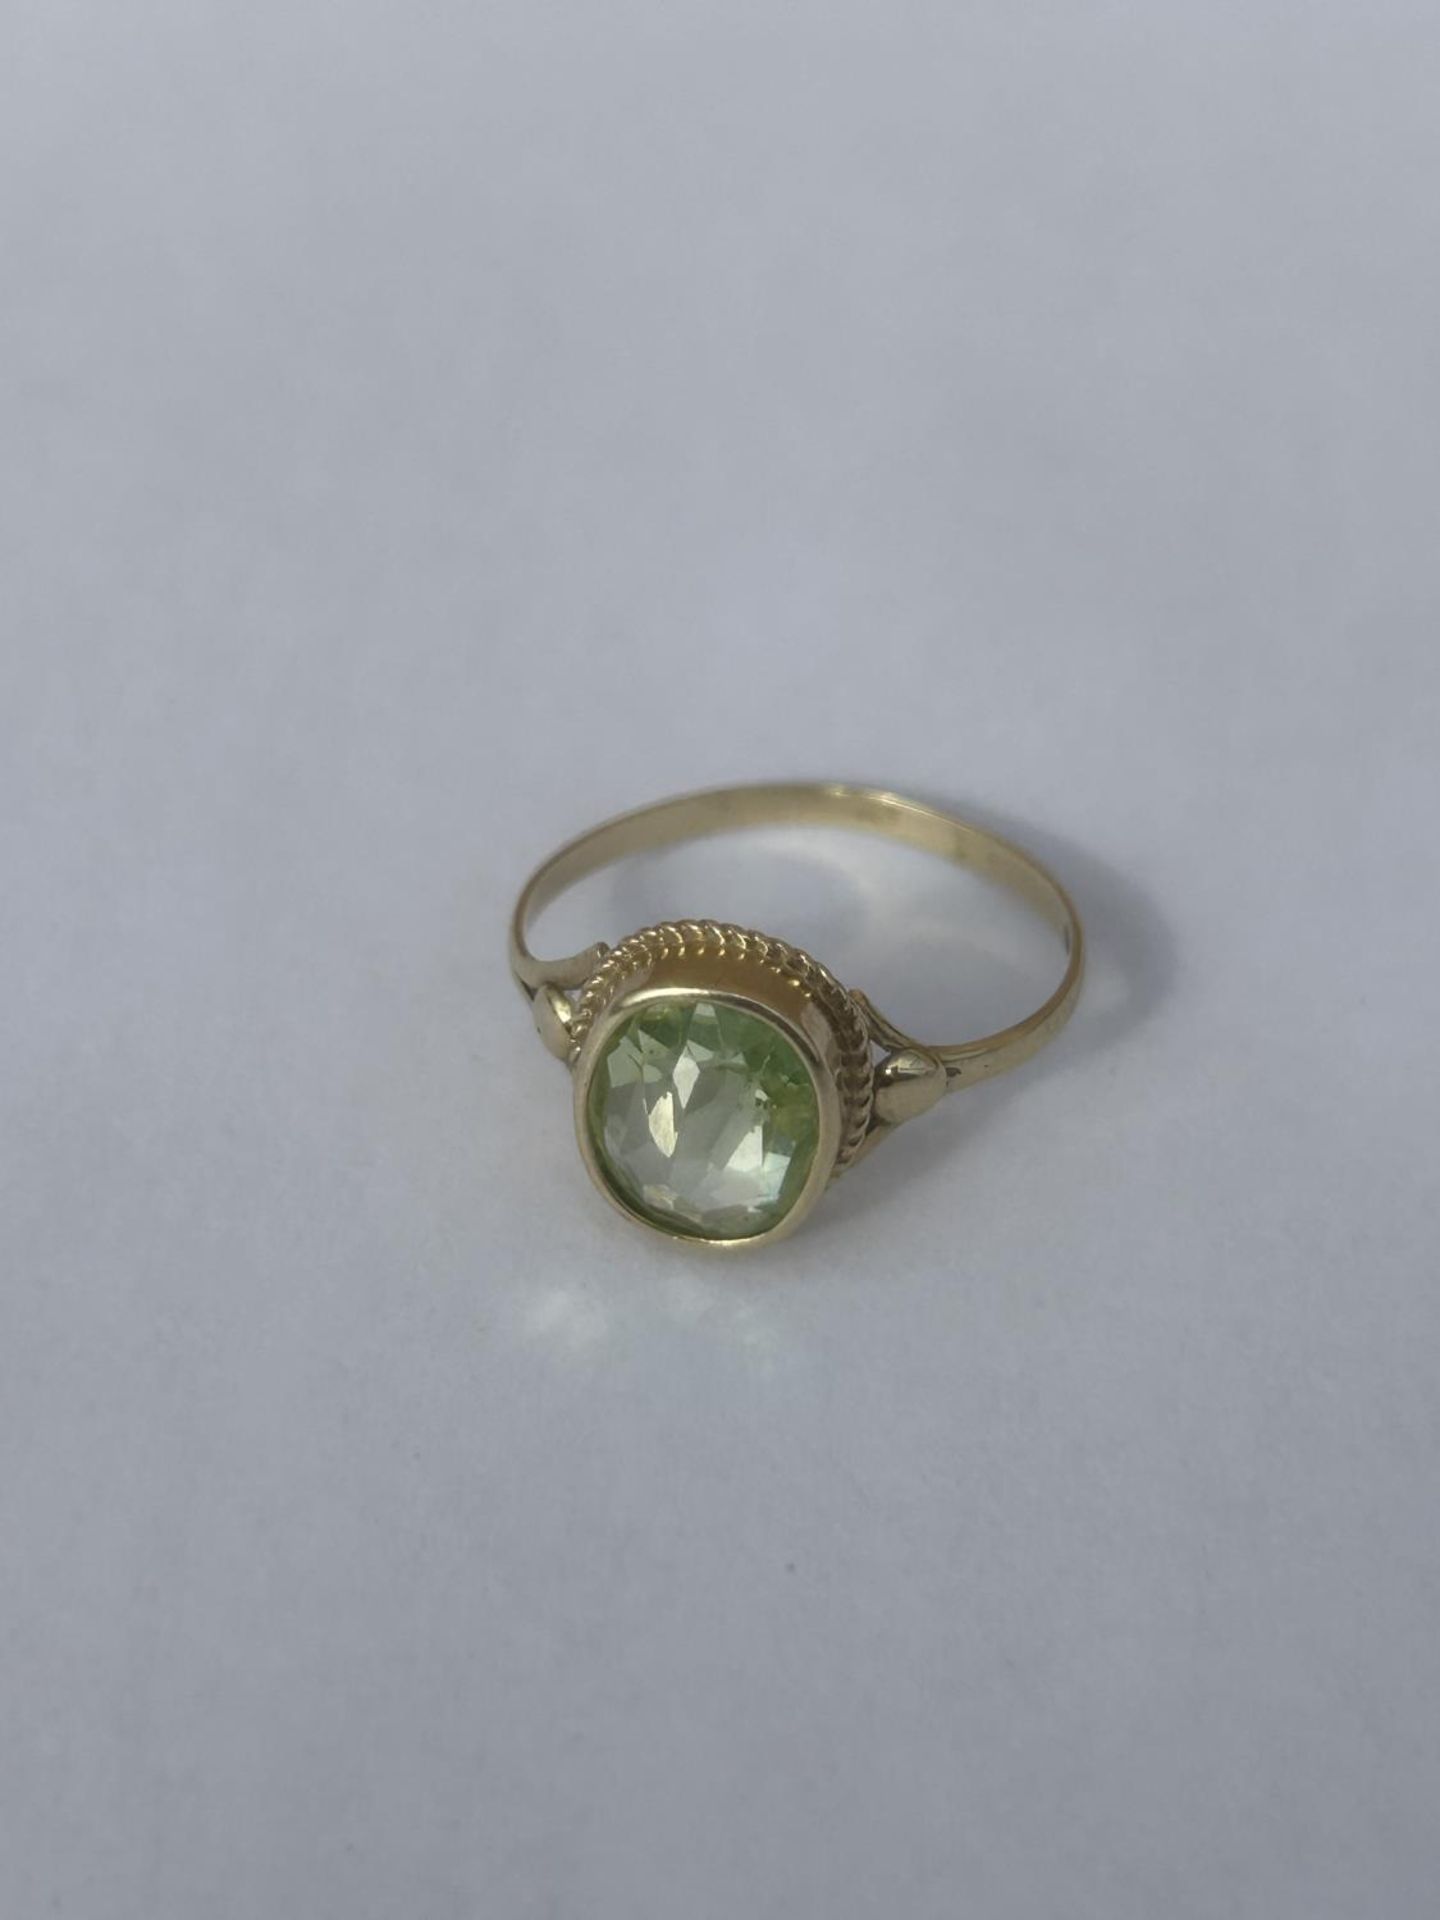 A 14CT GOLD RING WITH A PERIDOT GEMSTONE, SIZE N, WEIGHT 1.65 G